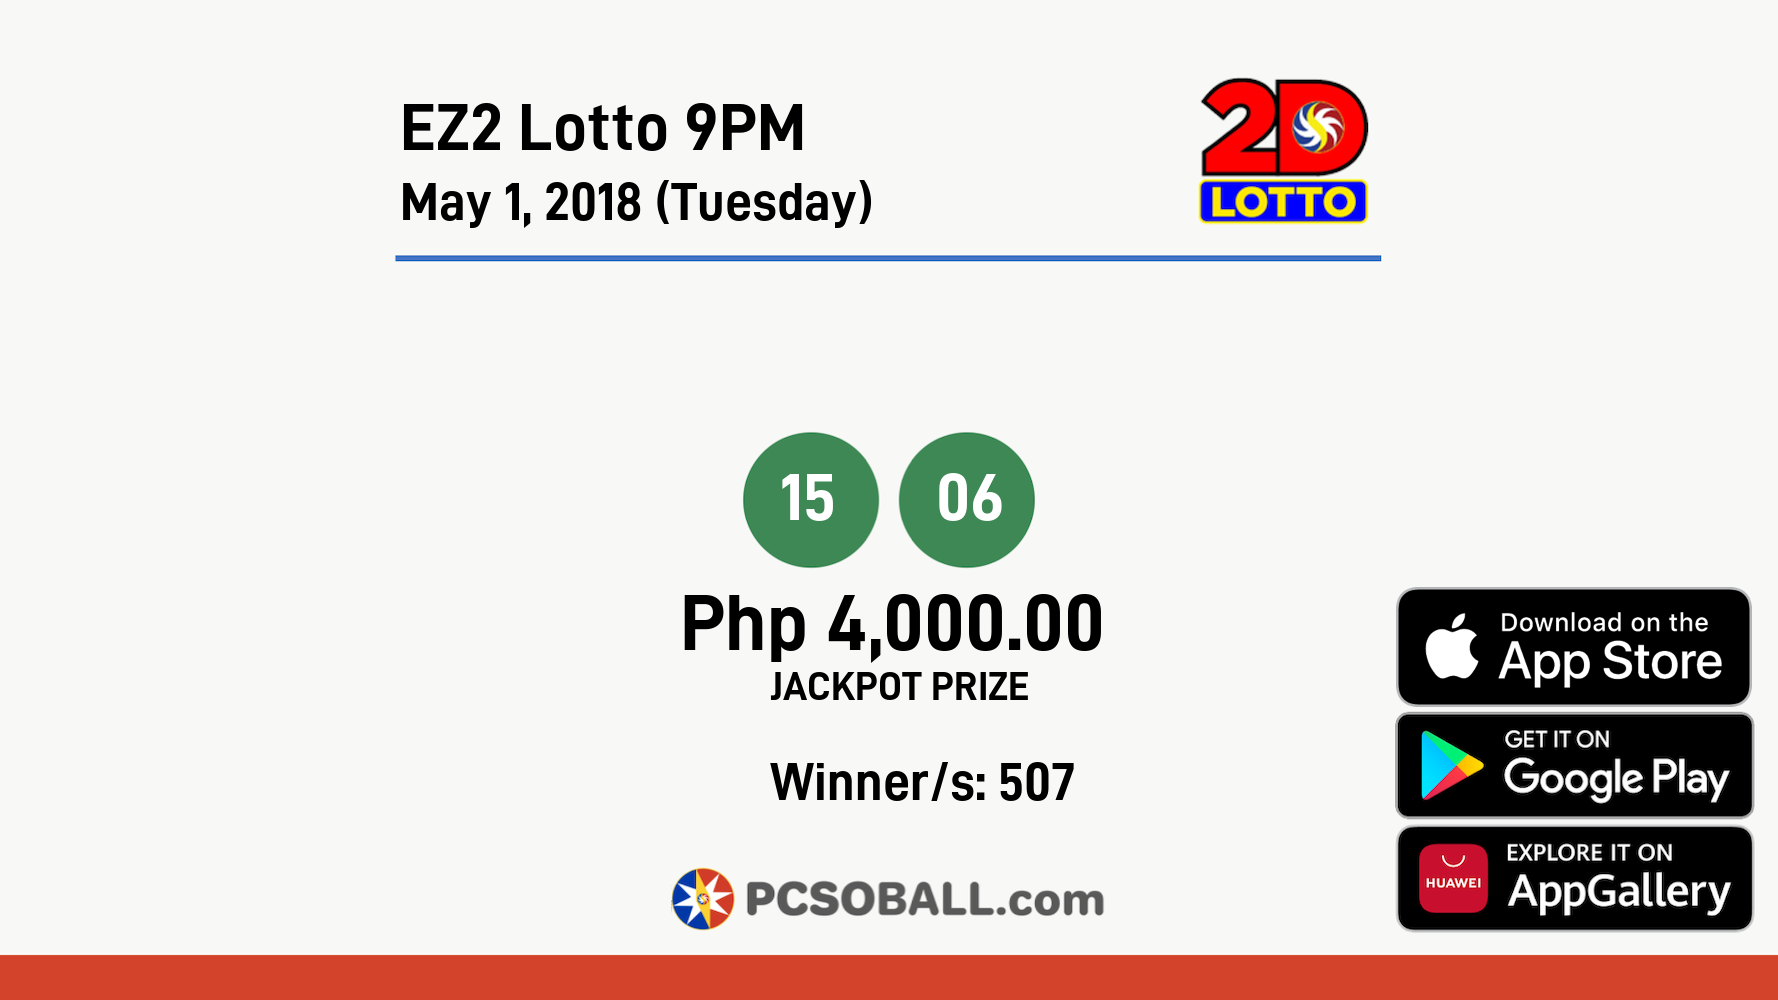 EZ2 Lotto 9PM May 1, 2018 (Tuesday) Result